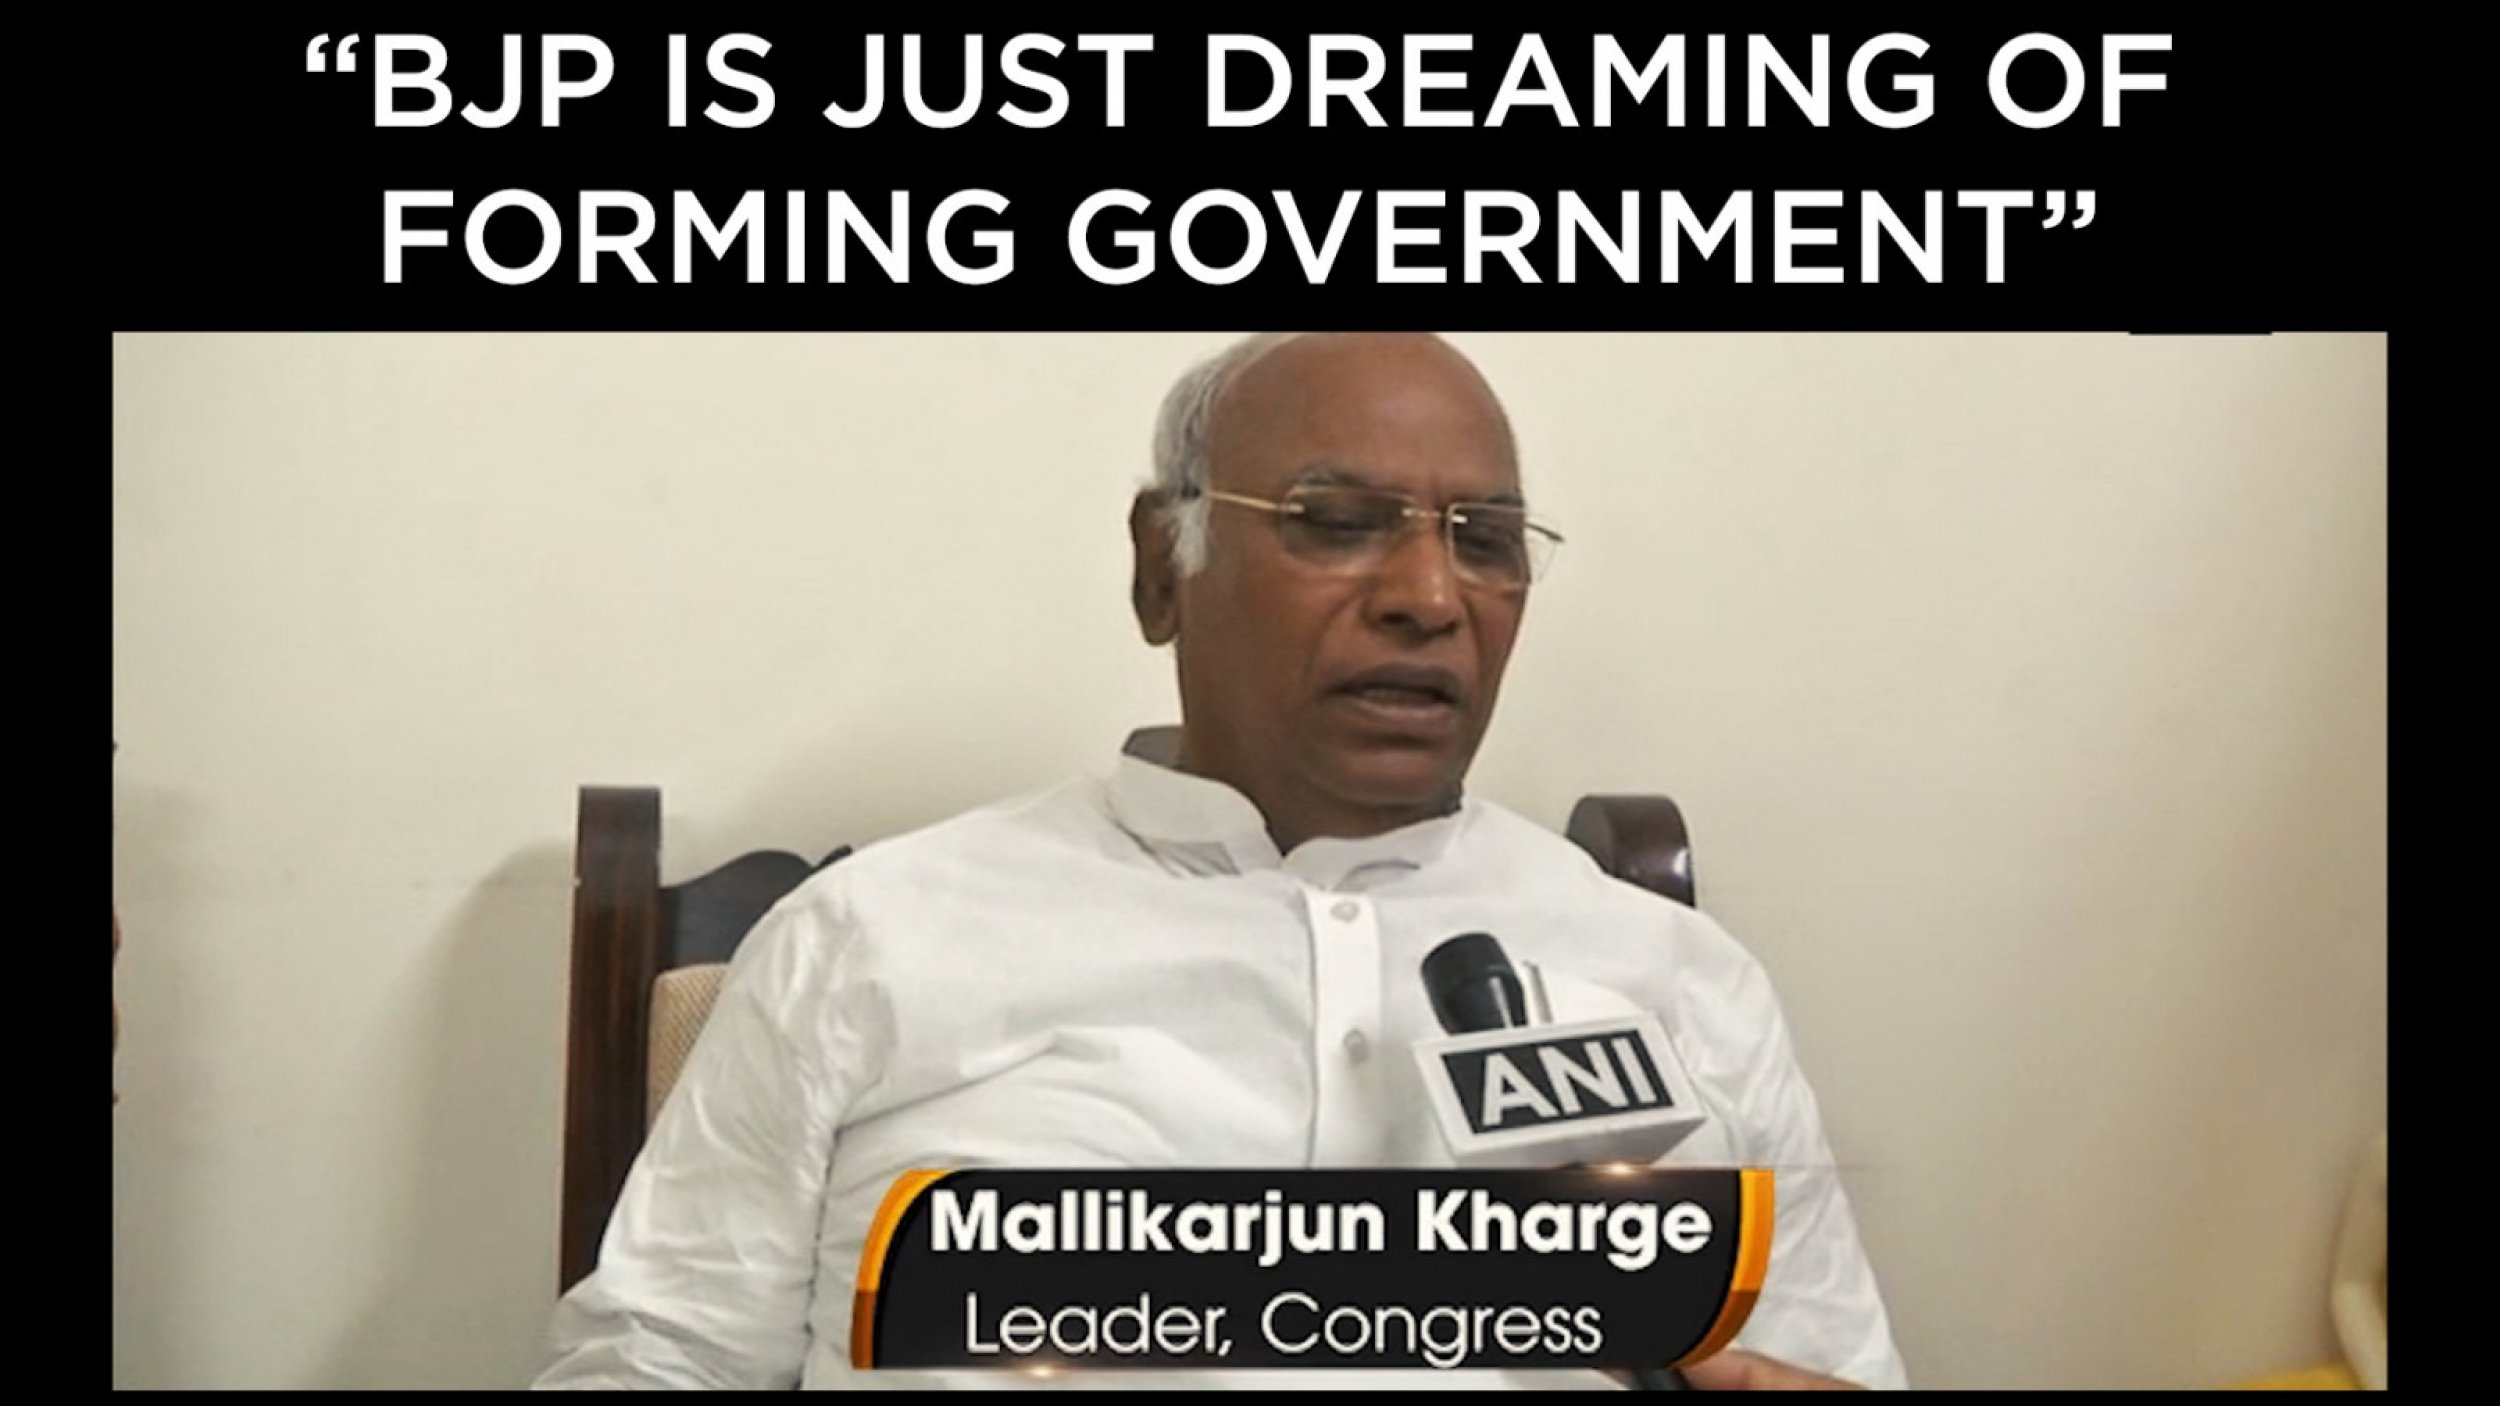 BJP is just dreaming of forming the government says Congress leader Mallikarjun Kharge